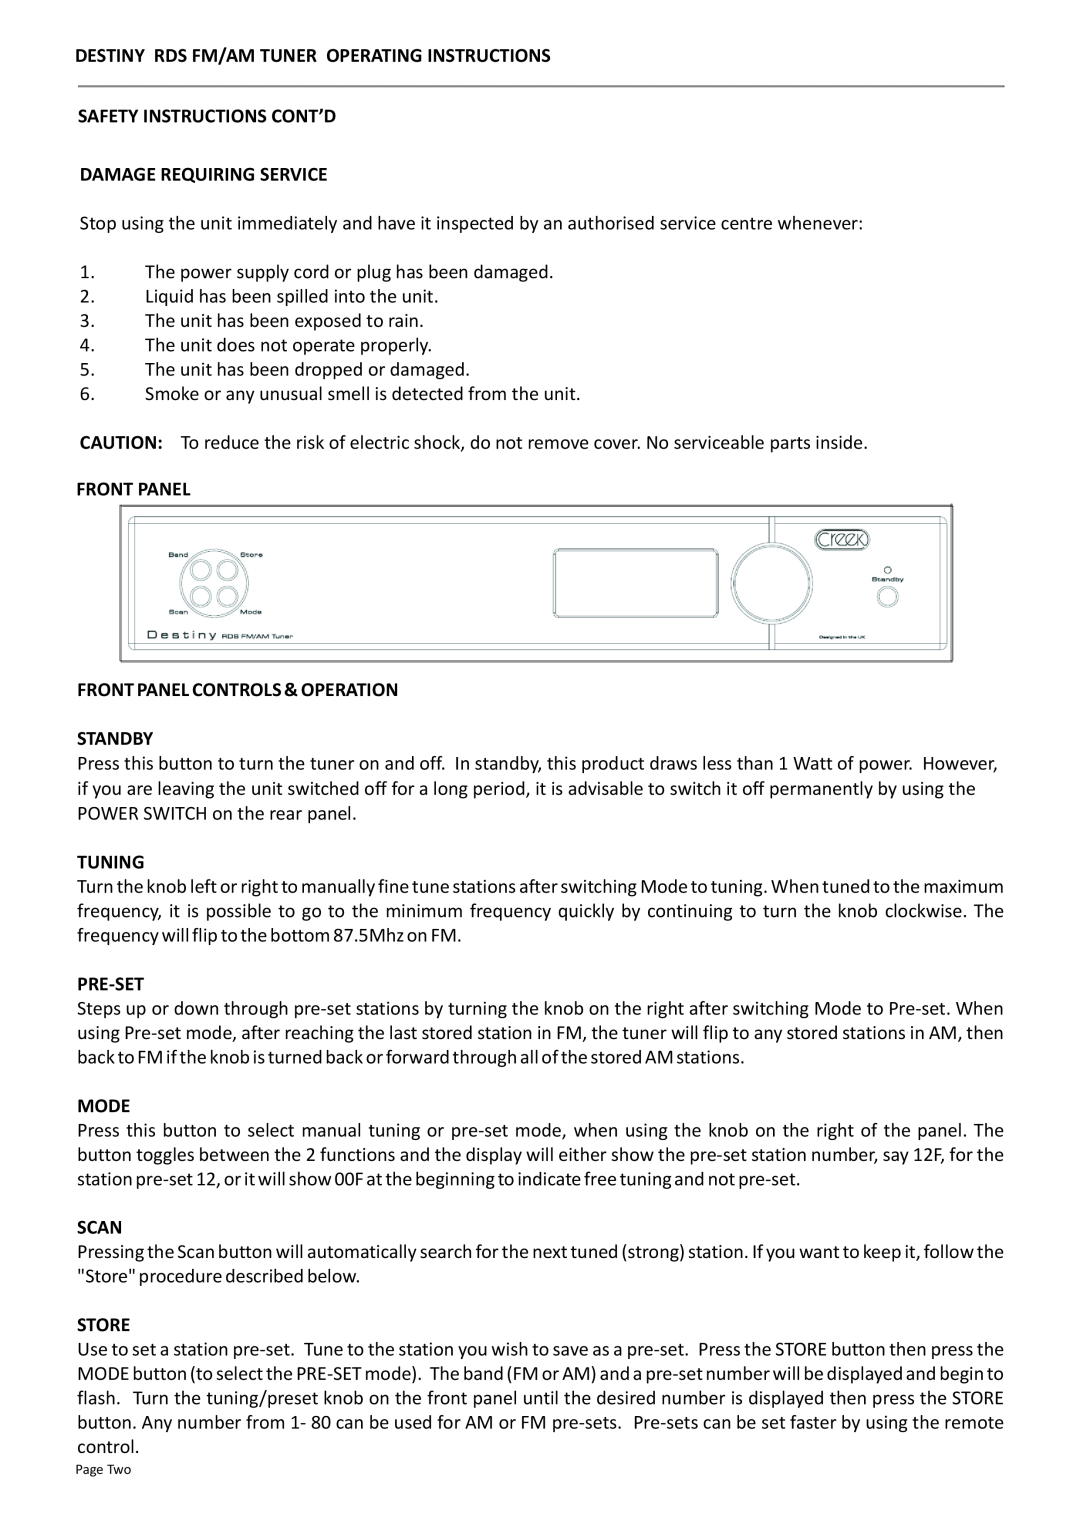 Creek Audio Destiny Rds Fm/Am Tuner Operating Instructions, Safety Instructions Cont’D, Damage Requiring Service, Mode 